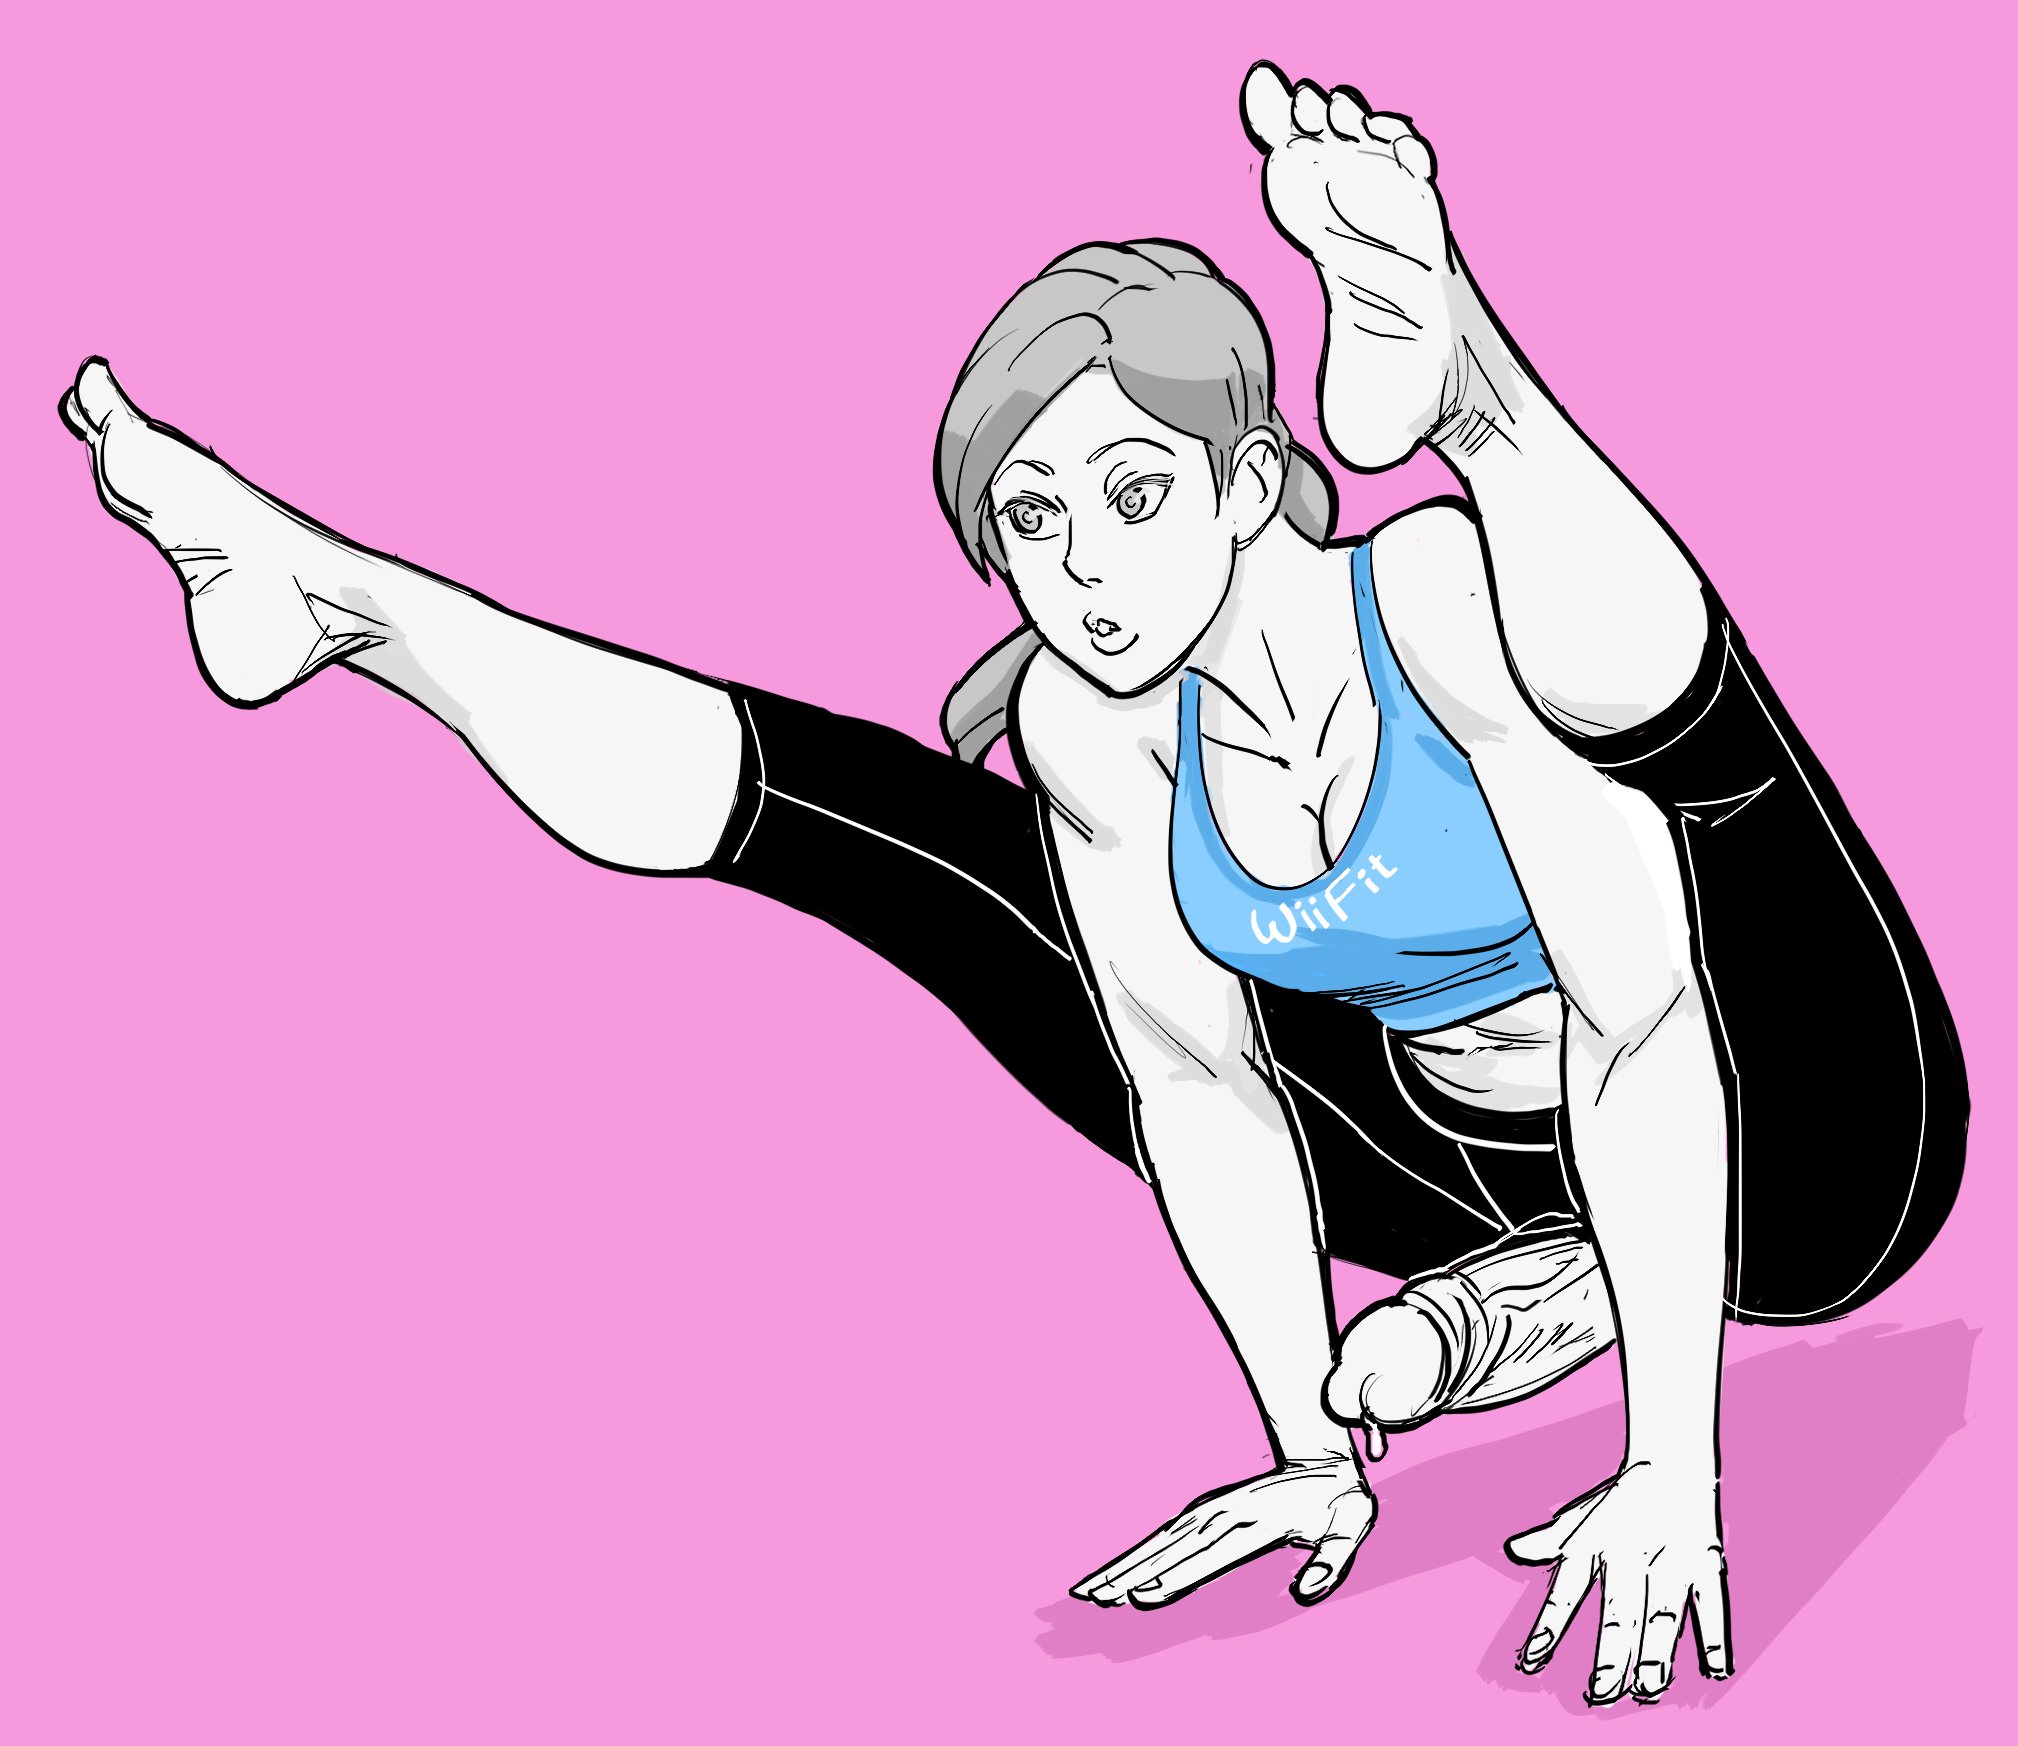 I did this to practice body composition by drawing weird yoga poses, but ma...